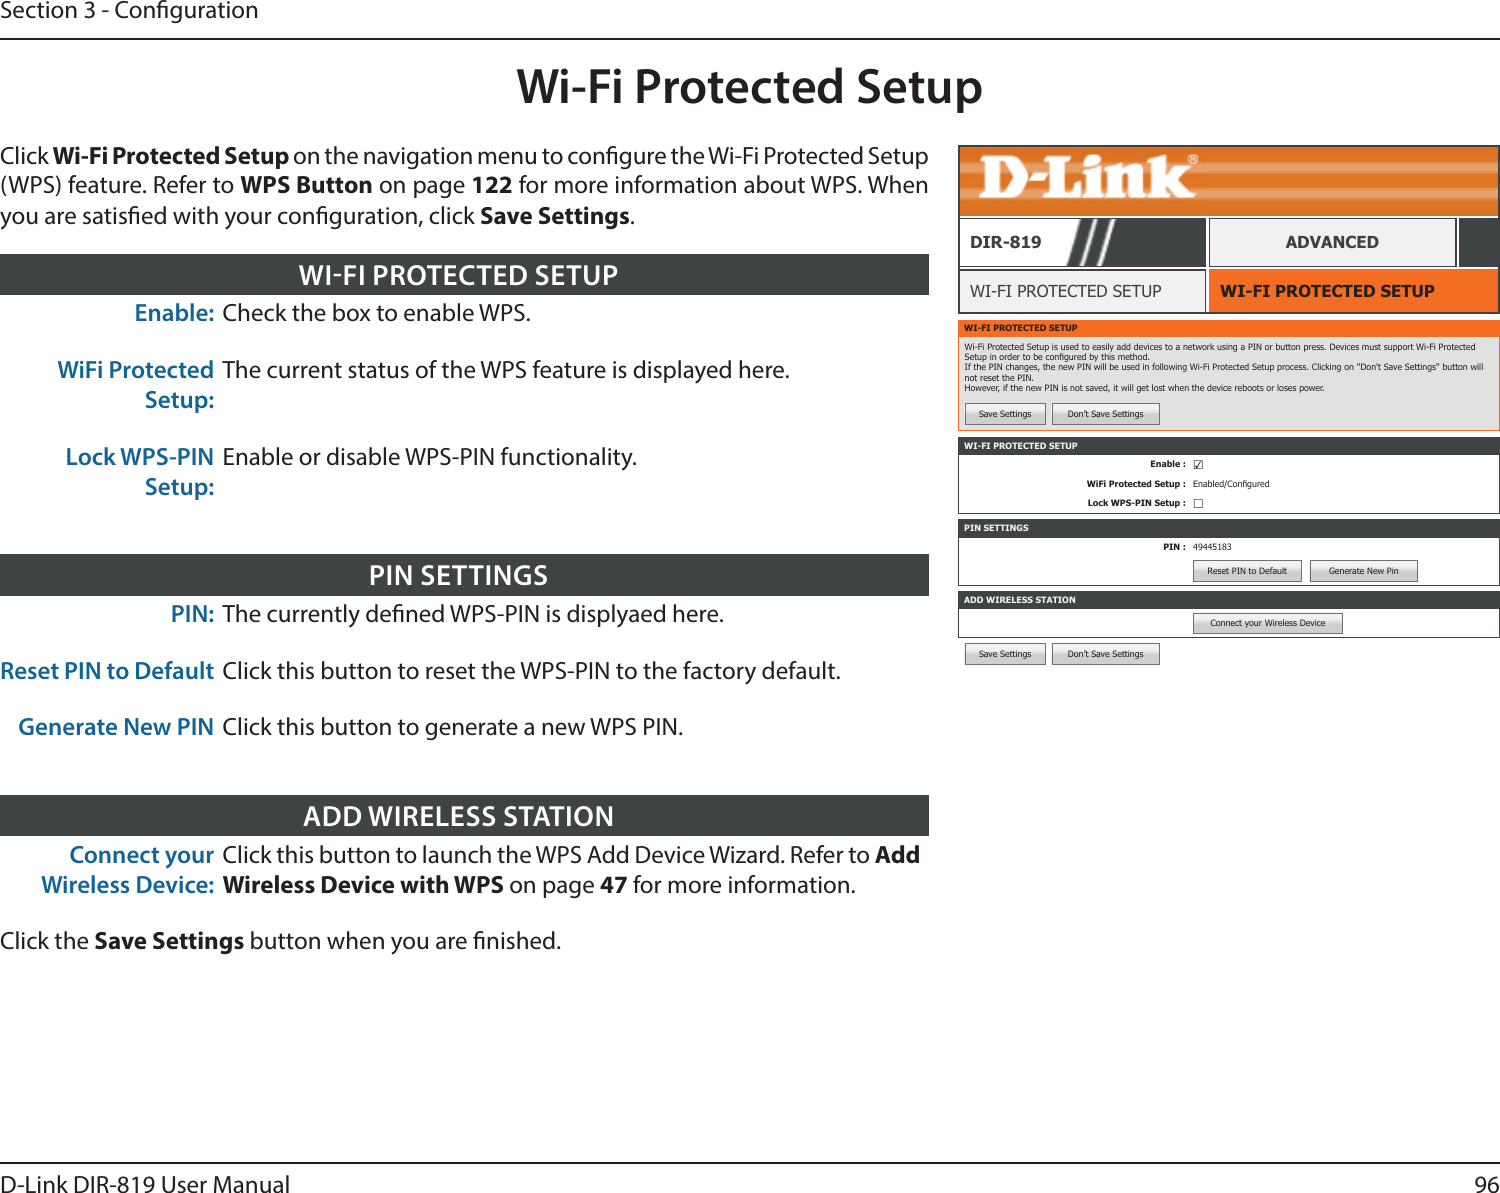 96D-Link DIR-819 User ManualSection 3 - CongurationSave Settings Don’t Save SettingsWi-Fi Protected SetupWI-FI PROTECTED SETUPWI-FI PROTECTED SETUPDIR-819 ADVANCEDEnable: Check the box to enable WPS.WiFi Protected Setup:The current status of the WPS feature is displayed here.Lock WPS-PIN Setup:Enable or disable WPS-PIN functionality.WIFI PROTECTED SETUPPIN: The currently dened WPS-PIN is displyaed here.Reset PIN to Default Click this button to reset the WPS-PIN to the factory default.Generate New PIN Click this button to generate a new WPS PIN.PIN SETTINGSConnect your Wireless Device:Click this button to launch the WPS Add Device Wizard. Refer to Add Wireless Device with WPS on page 47 for more information.Click the Save Settings button when you are nished.ADD WIRELESS STATIONWI-FI PROTECTED SETUPWi-Fi Protected Setup is used to easily add devices to a network using a PIN or button press. Devices must support Wi-Fi Protected Setup in order to be congured by this method. If the PIN changes, the new PIN will be used in following Wi-Fi Protected Setup process. Clicking on &apos;&apos;Don&apos;t Save Settings&apos;&apos; button will not reset the PIN. However, if the new PIN is not saved, it will get lost when the device reboots or loses power.Save Settings Don’t Save SettingsPIN SETTINGSPIN : 49445183Reset PIN to Default Generate New PinADD WIRELESS STATIONConnect your Wireless DeviceWI-FI PROTECTED SETUPEnable : ☑WiFi Protected Setup : Enabled/ConguredLock WPS-PIN Setup : ☐Click Wi-Fi Protected Setup on the navigation menu to congure the Wi-Fi Protected Setup (WPS) feature. Refer to WPS Button on page 122 for more information about WPS. When you are satised with your conguration, click Save Settings.